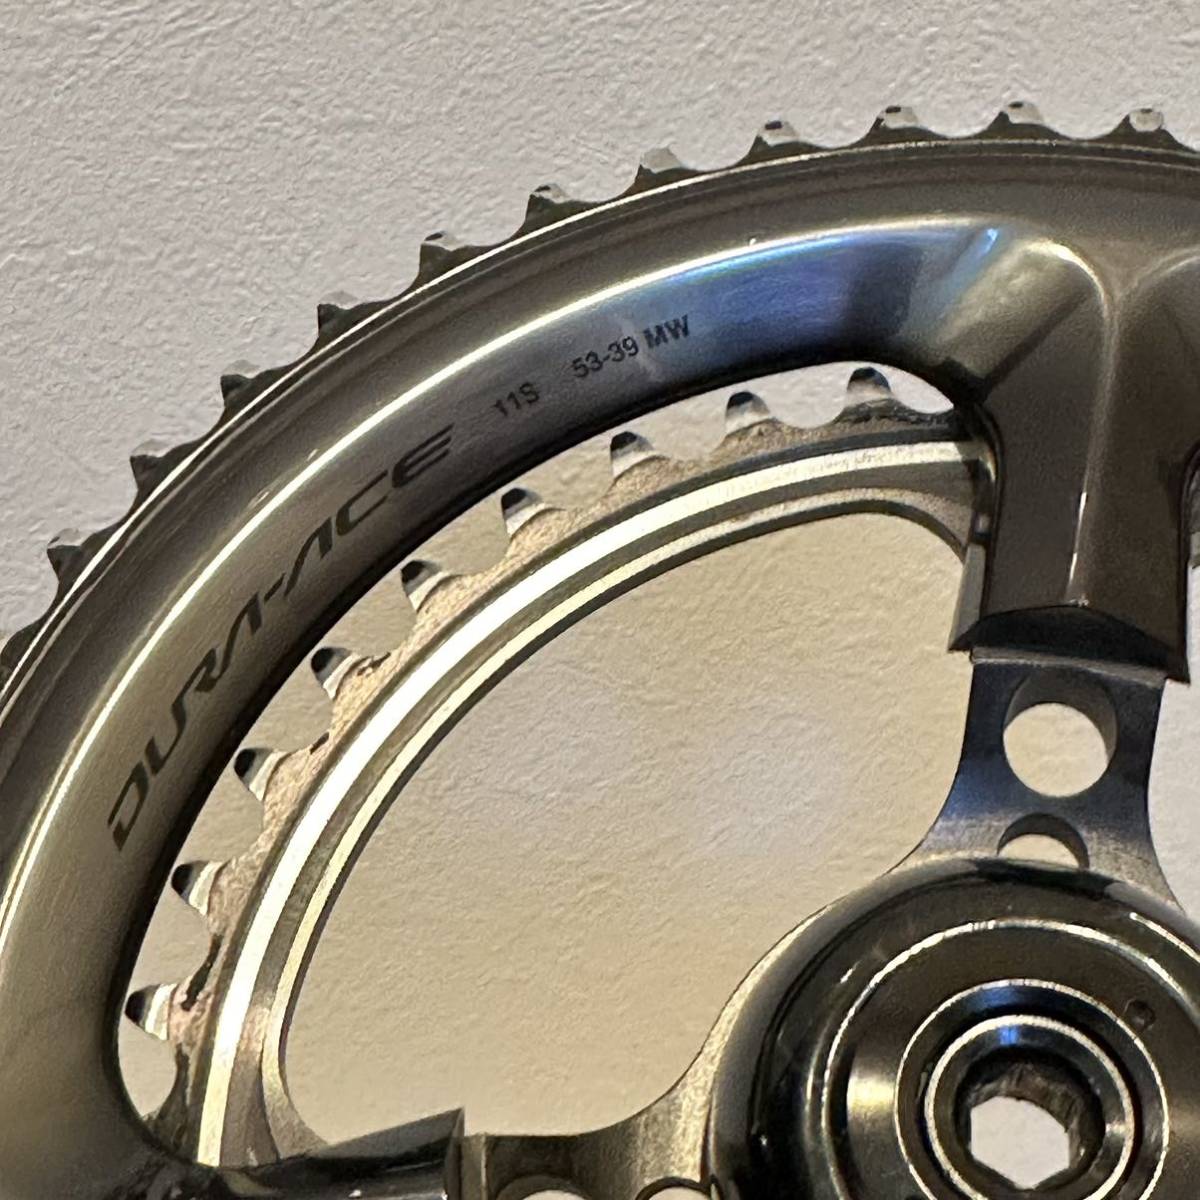 S-Works Power Meter Crank エスワークス パワーメーター クランク 172.5mm 53-39T 4アーム化 シマノ SHIMANO specialized_画像2